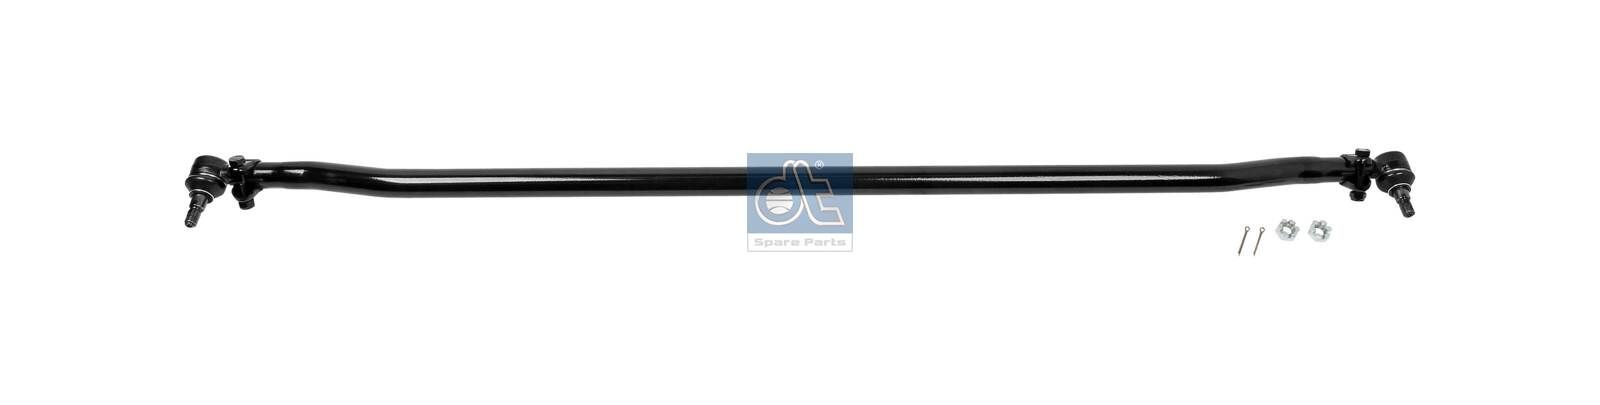 DT Spare Parts 4.67440 Rod Assembly 6023300303